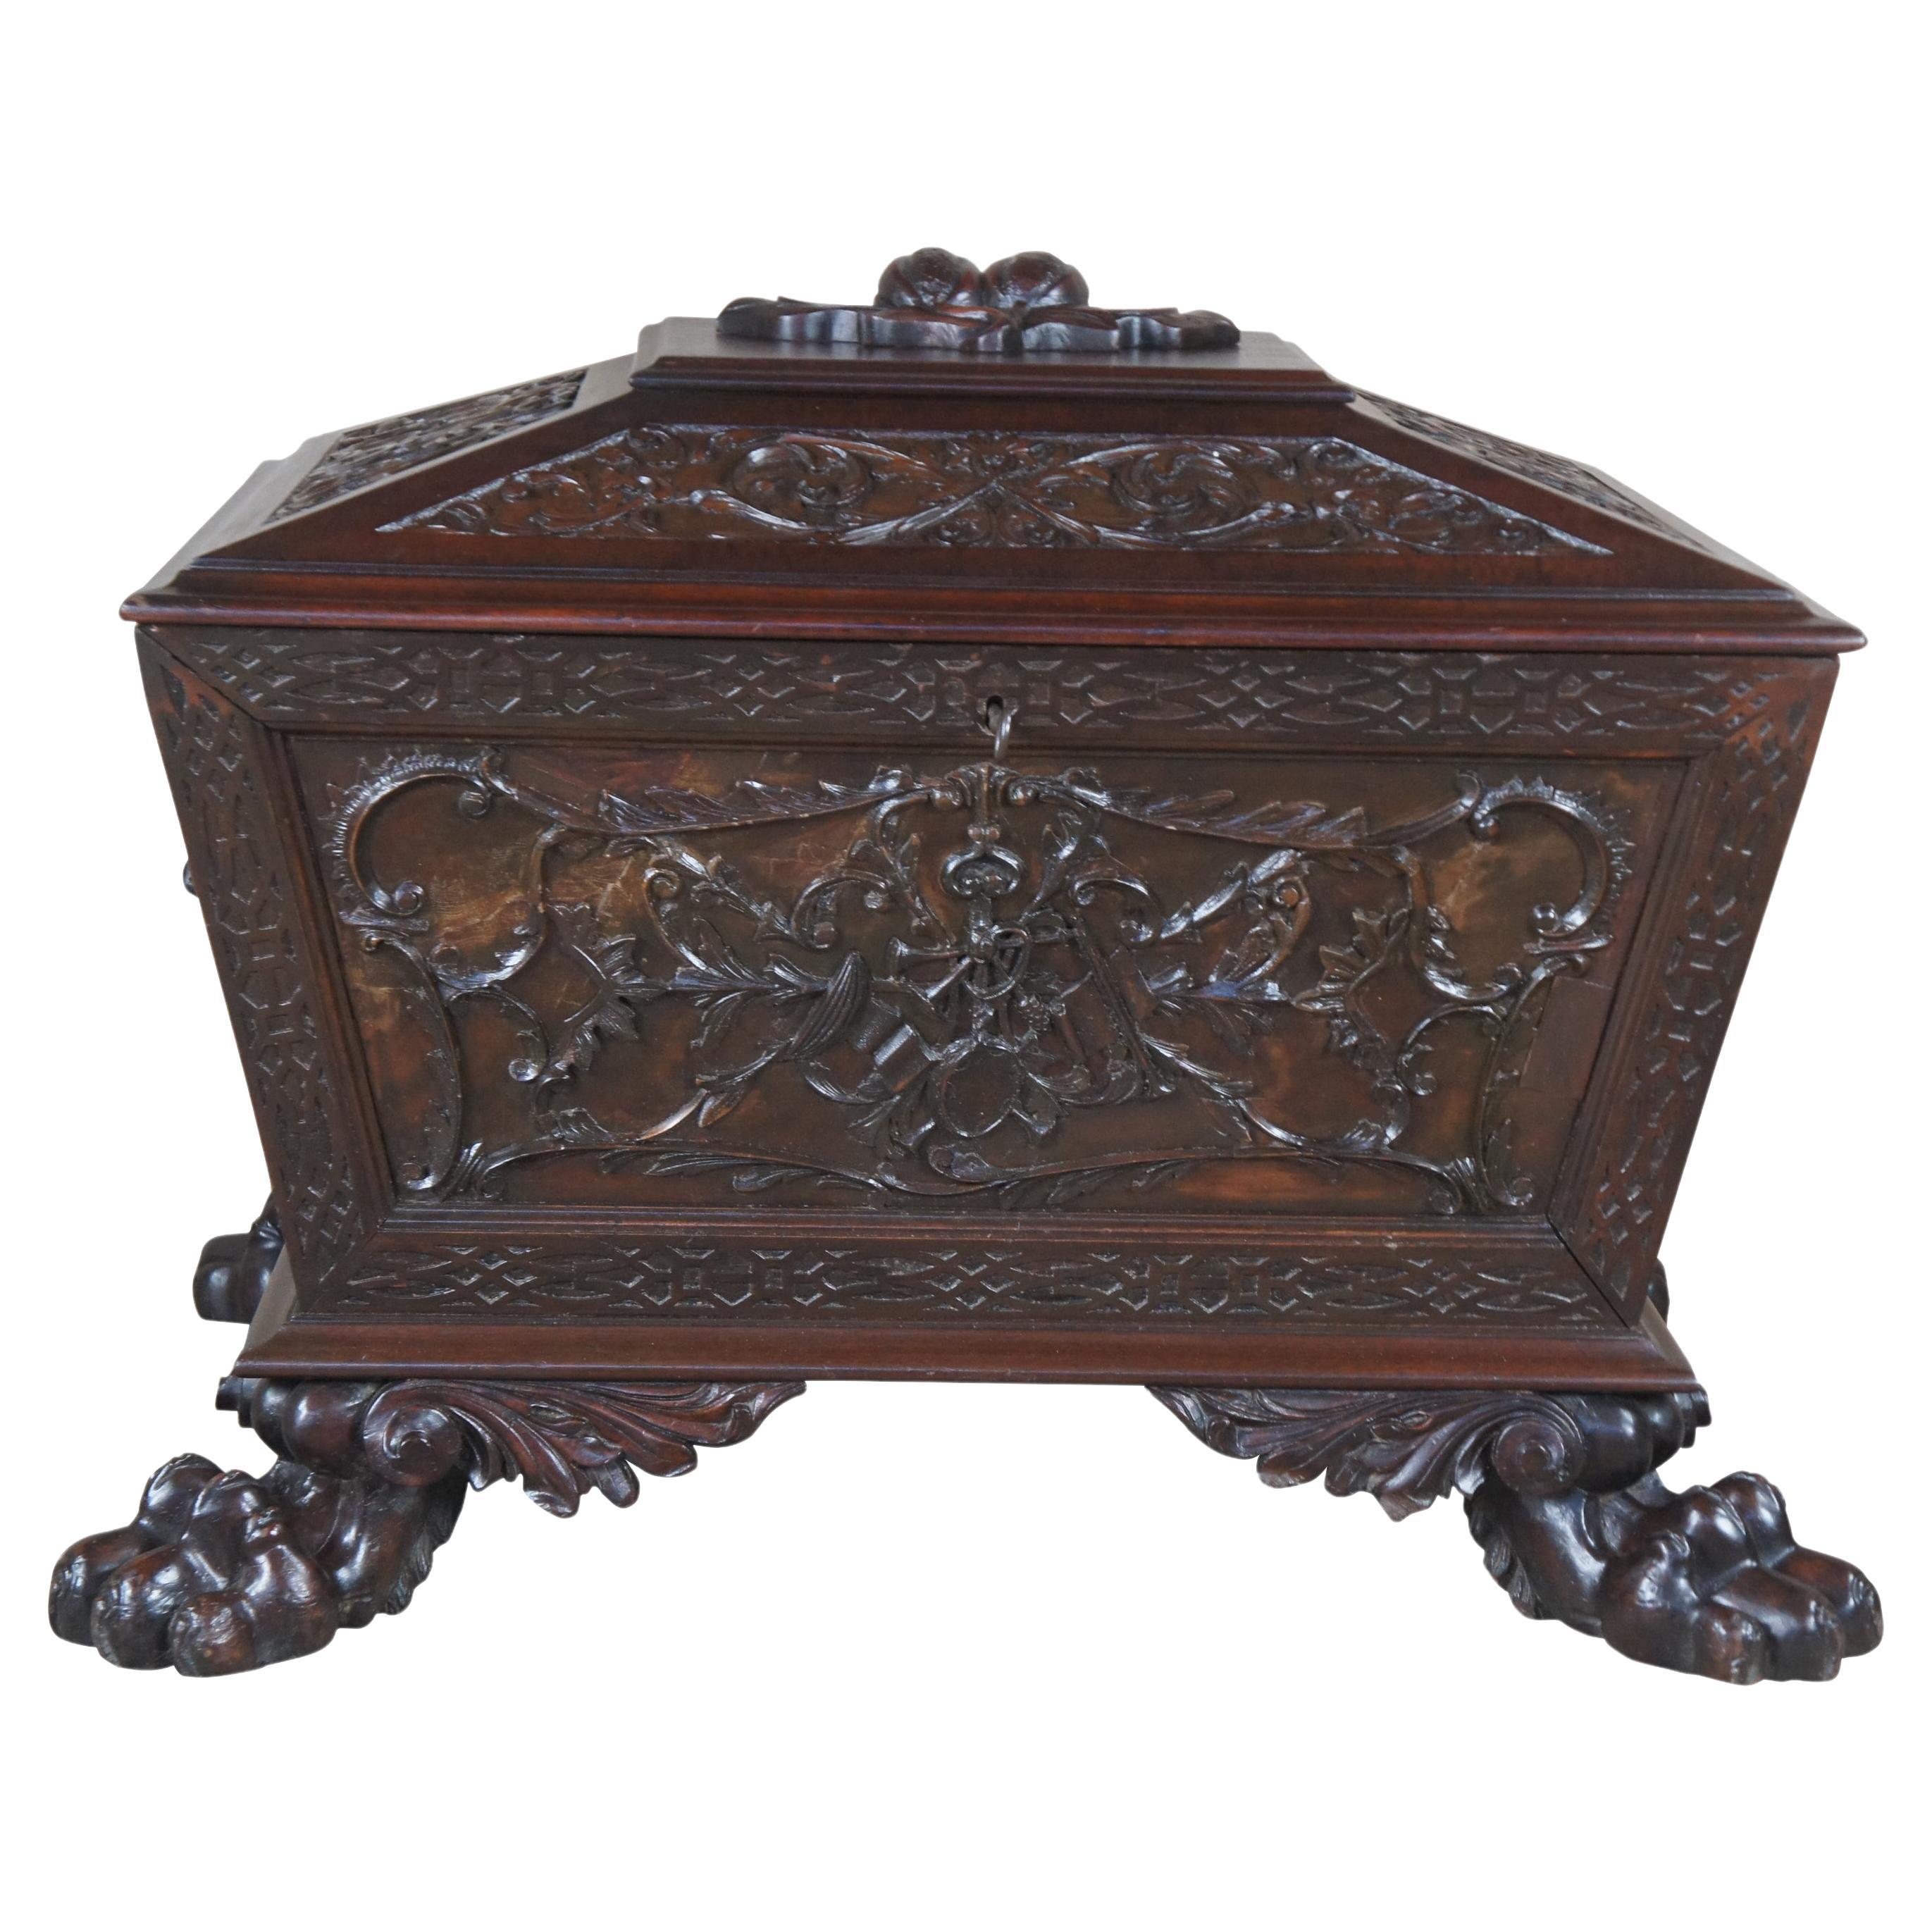 
Antique English Regency cellarette / cassone casket / coffer / coffret , trunk or marriage chest. Made of carved mahogany featuring blind fretwork with Neoclassical floral and acanthus designs, fruit and berries, high relief carved lion heads and